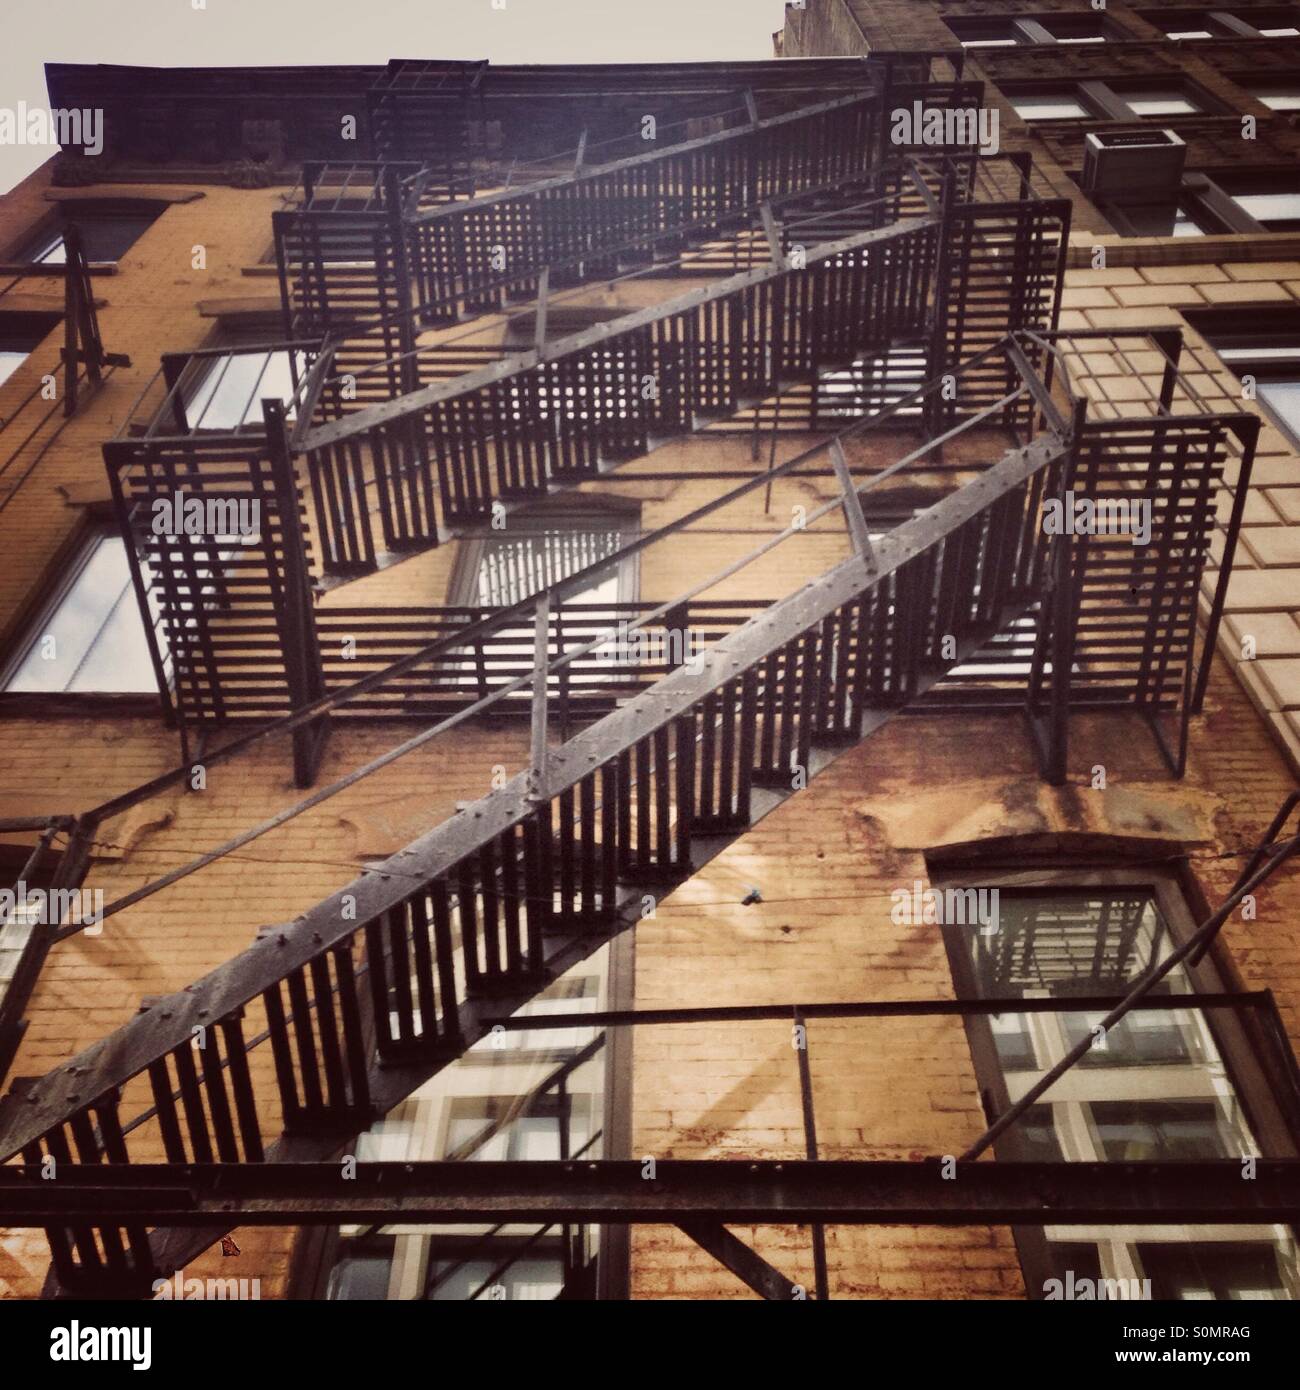 Metal fire escape stairs, Manhattan, New York City, United States of America. Stock Photo